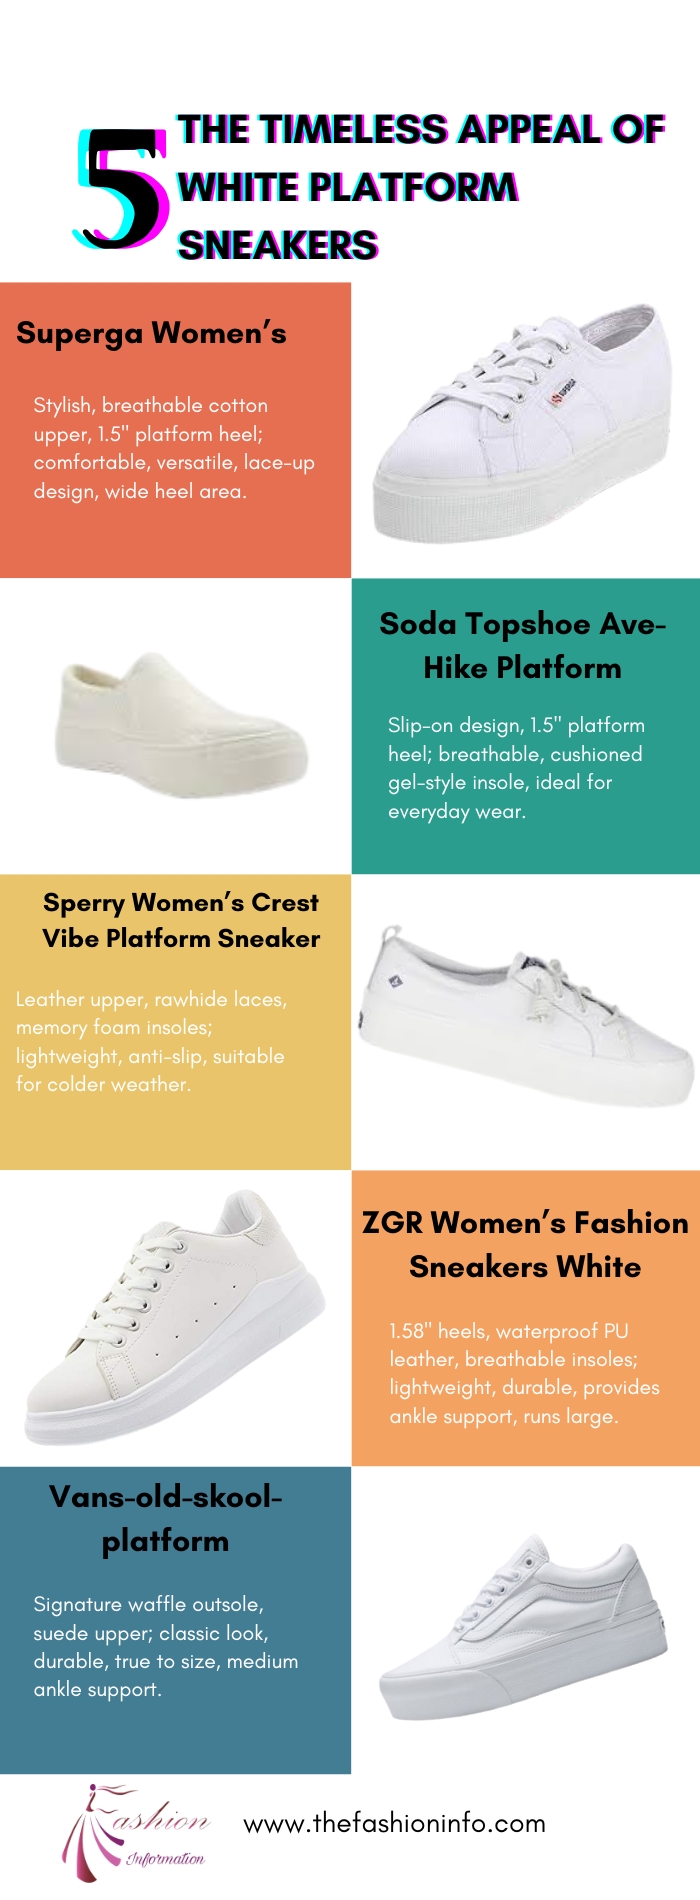 5 The Timeless Appeal of White Platform Sneakers